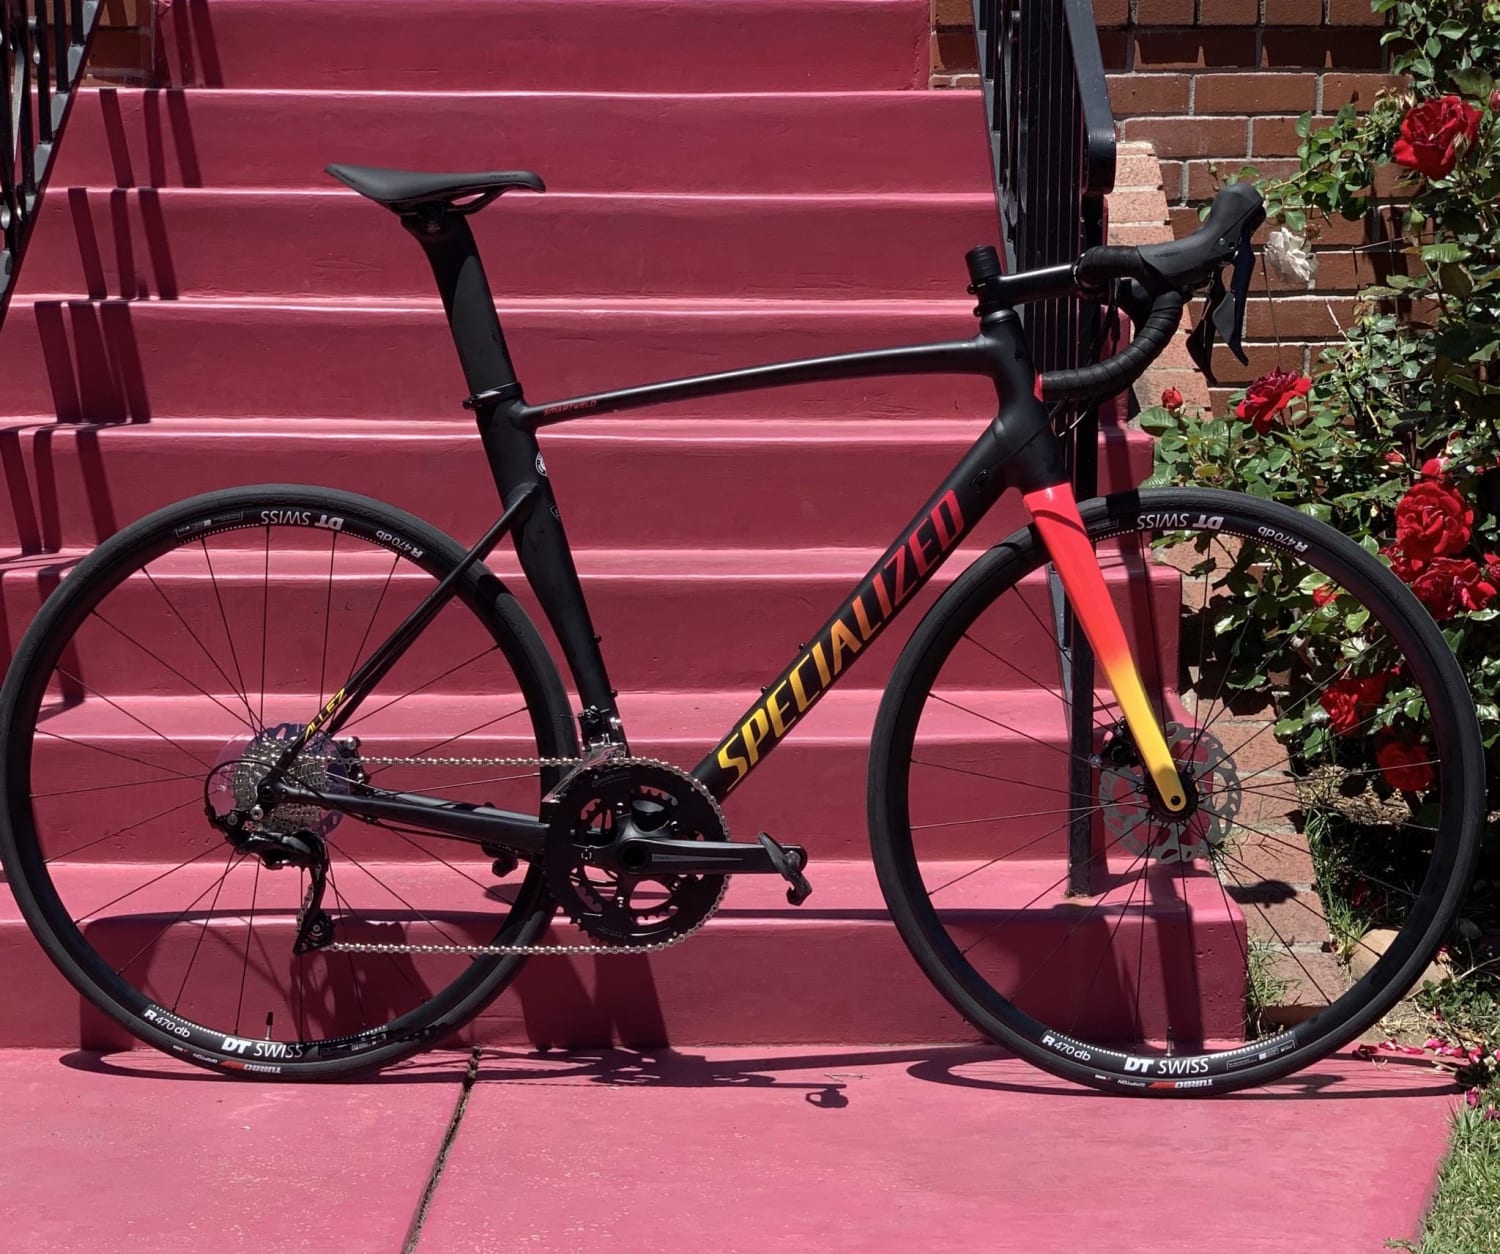 NBD! My 2020 Specialized Allez Sprint. First road bike! The color really pops in-person.